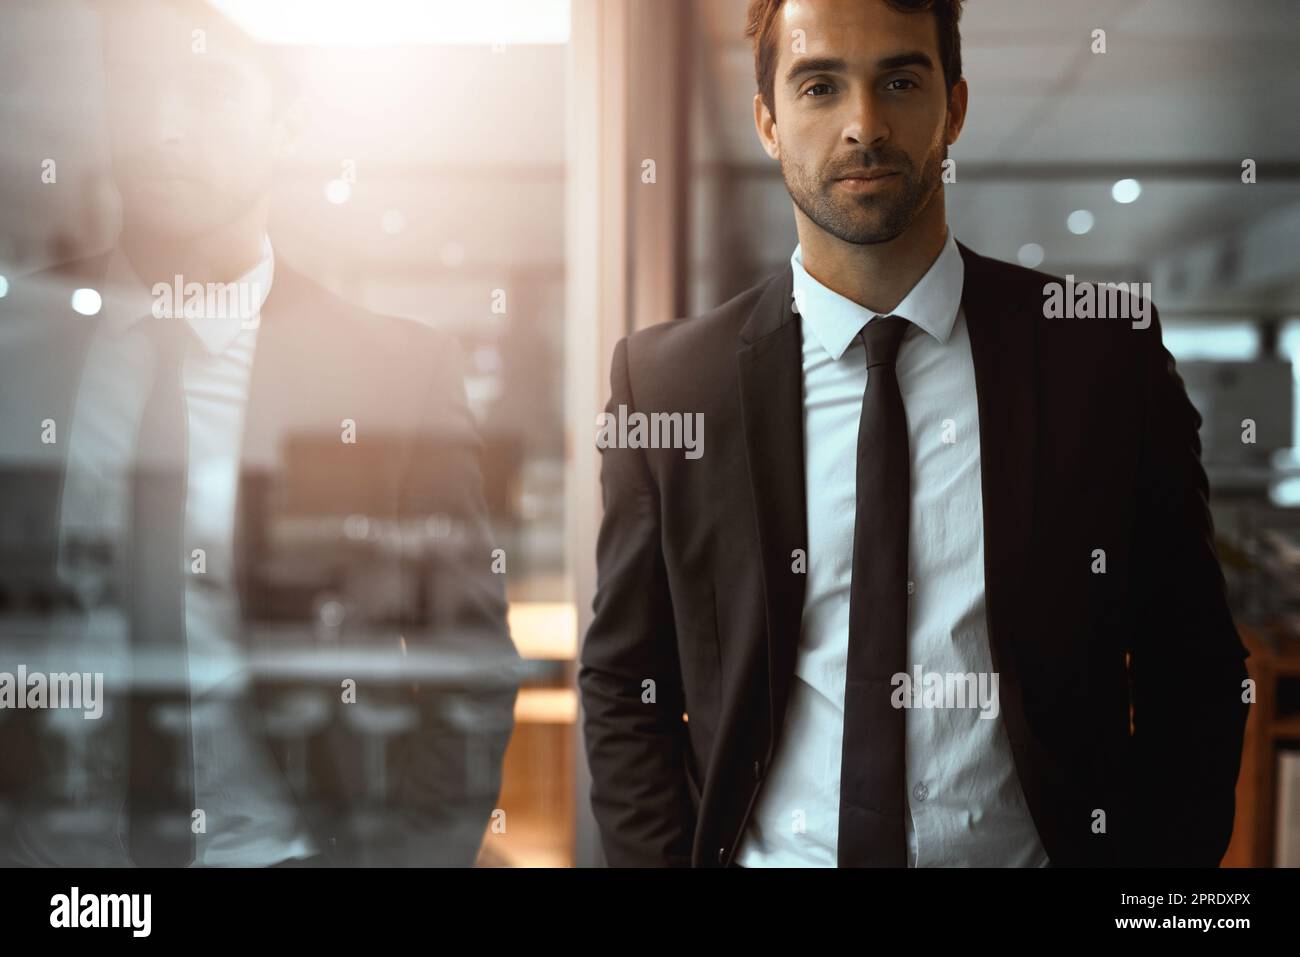 Standing tall in his successful empire. Portrait of a young businessman standing in an office. Stock Photo